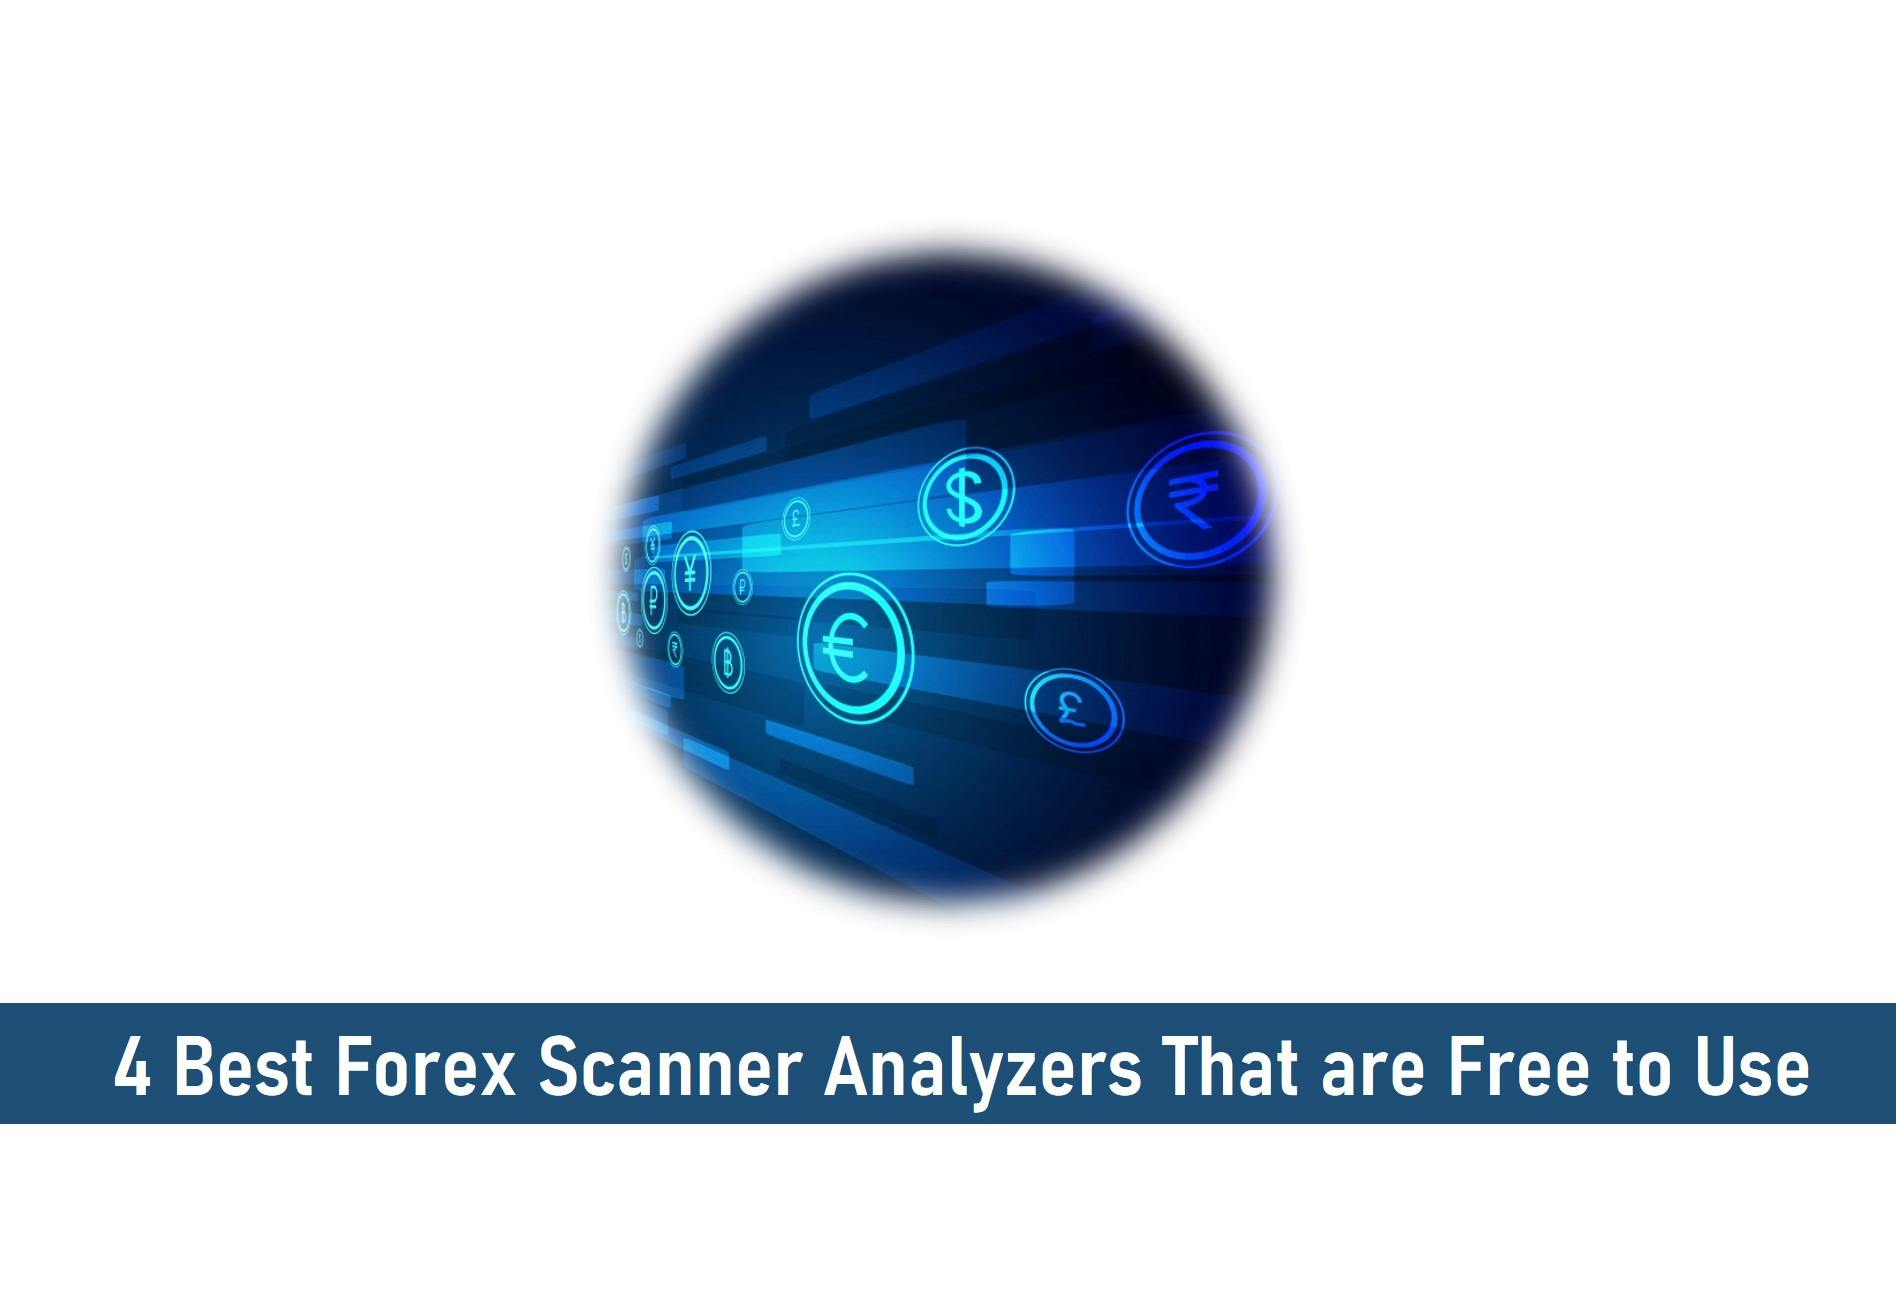 4 Best Forex Scanner Analyzers That are Free to Use